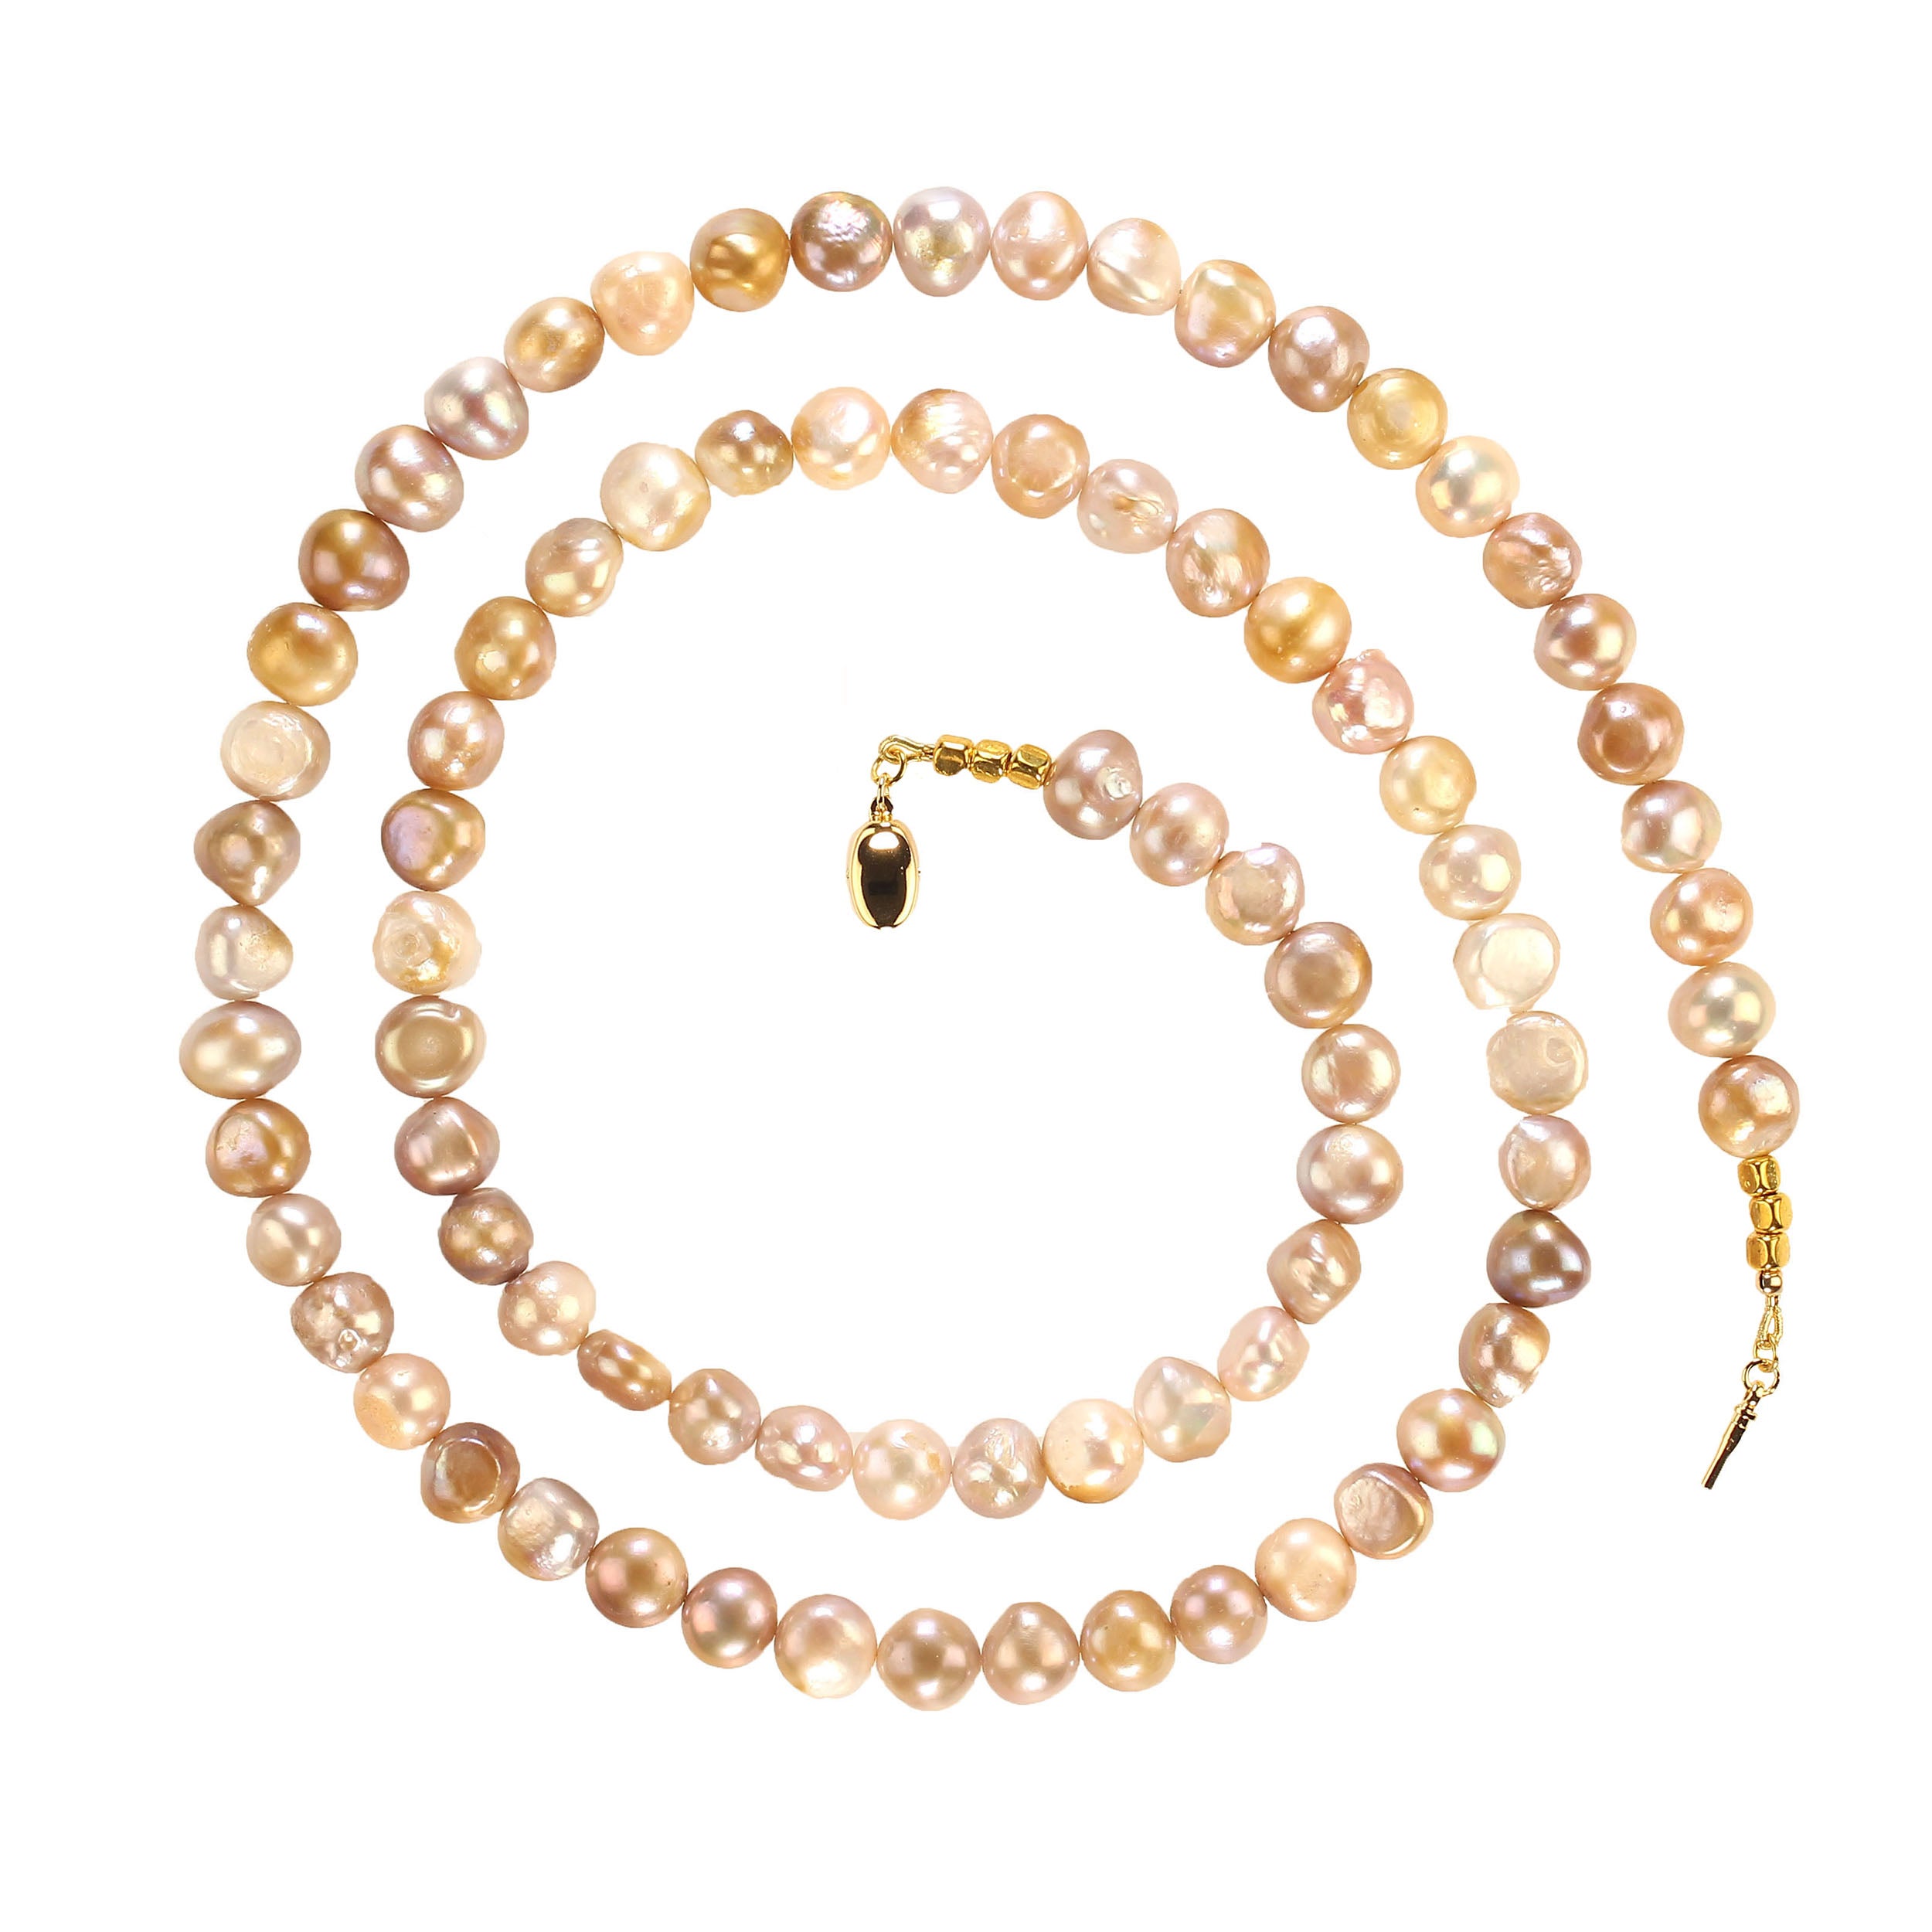 Gorgeous and elegant 32-inch freshwater pearl necklace in shades of gold, mauve, and gray.  This unique 8-10mm pearl necklace is luscious. The glowing pearls are a delight to wear.  At 32 inches it can possibly be a double strand tightly wrapped.  A